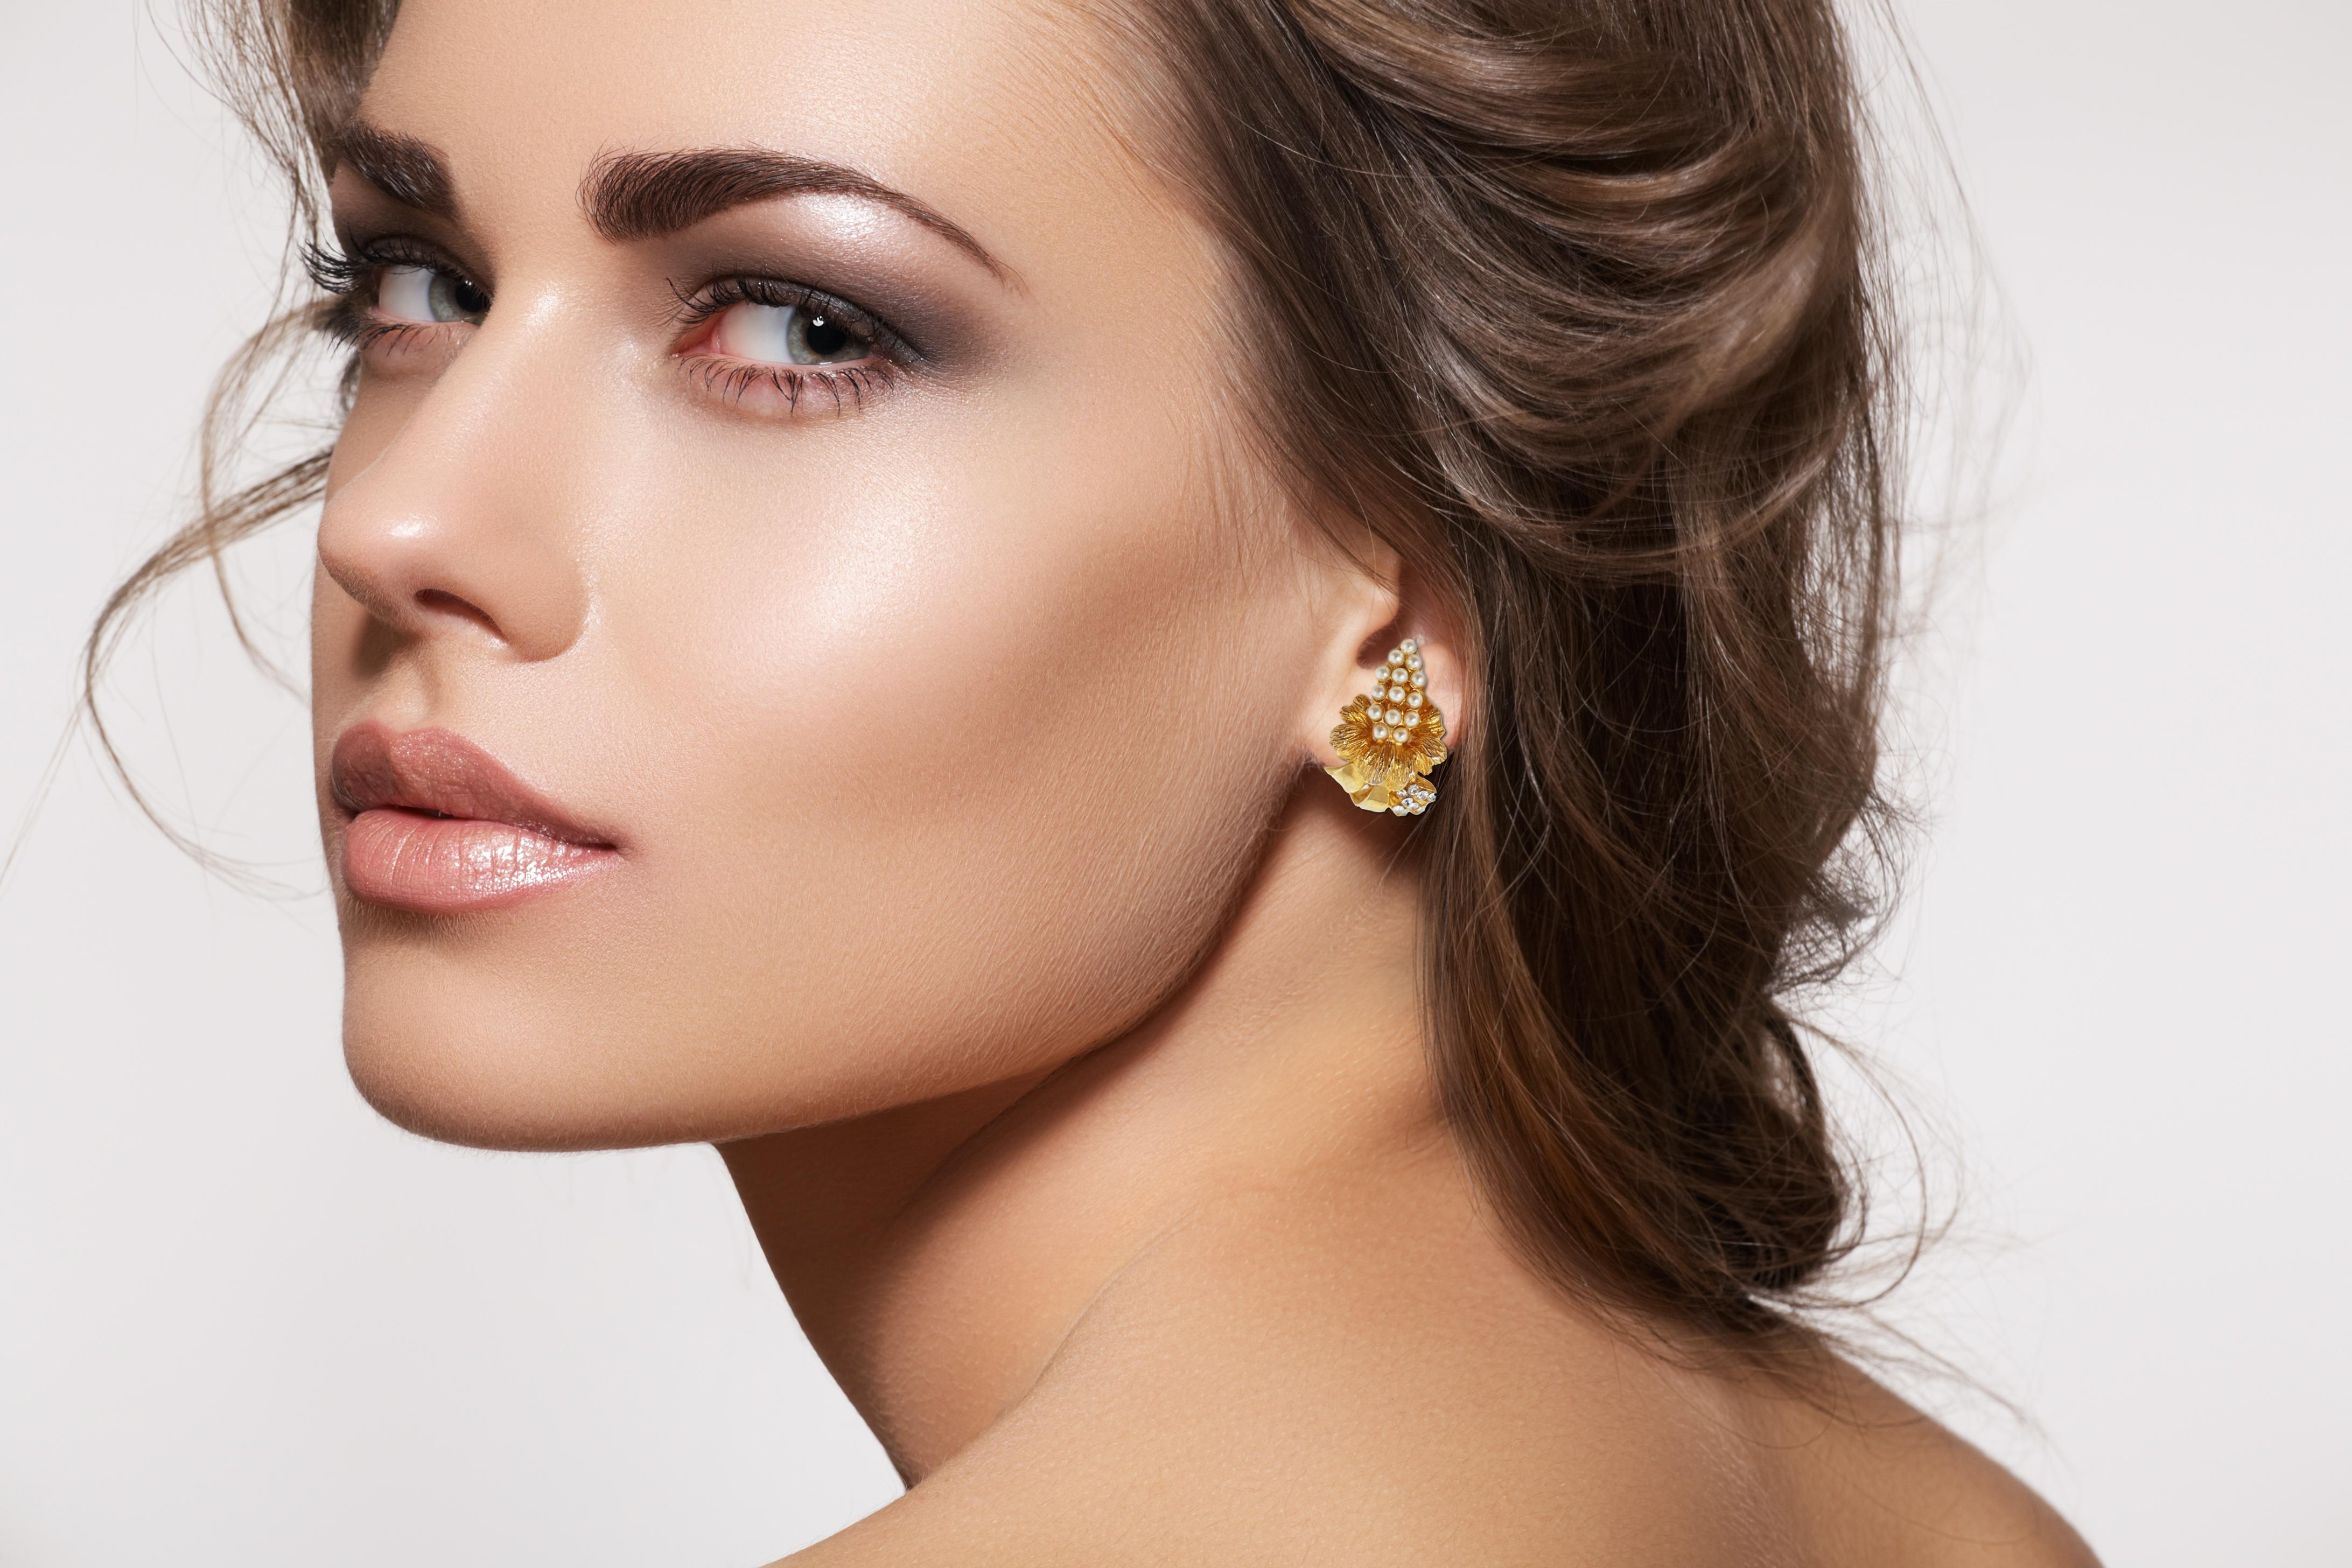 Gorgeous Hobé clip-on statement earrings, circa 1950s, featuring faux pearl and crystal rhinestone accents and vibrant gold-plating.  These chic earrings make an excellent addition to your vintage jewelry collection.

ABOUT HOBÉ:
Hobé was founded by